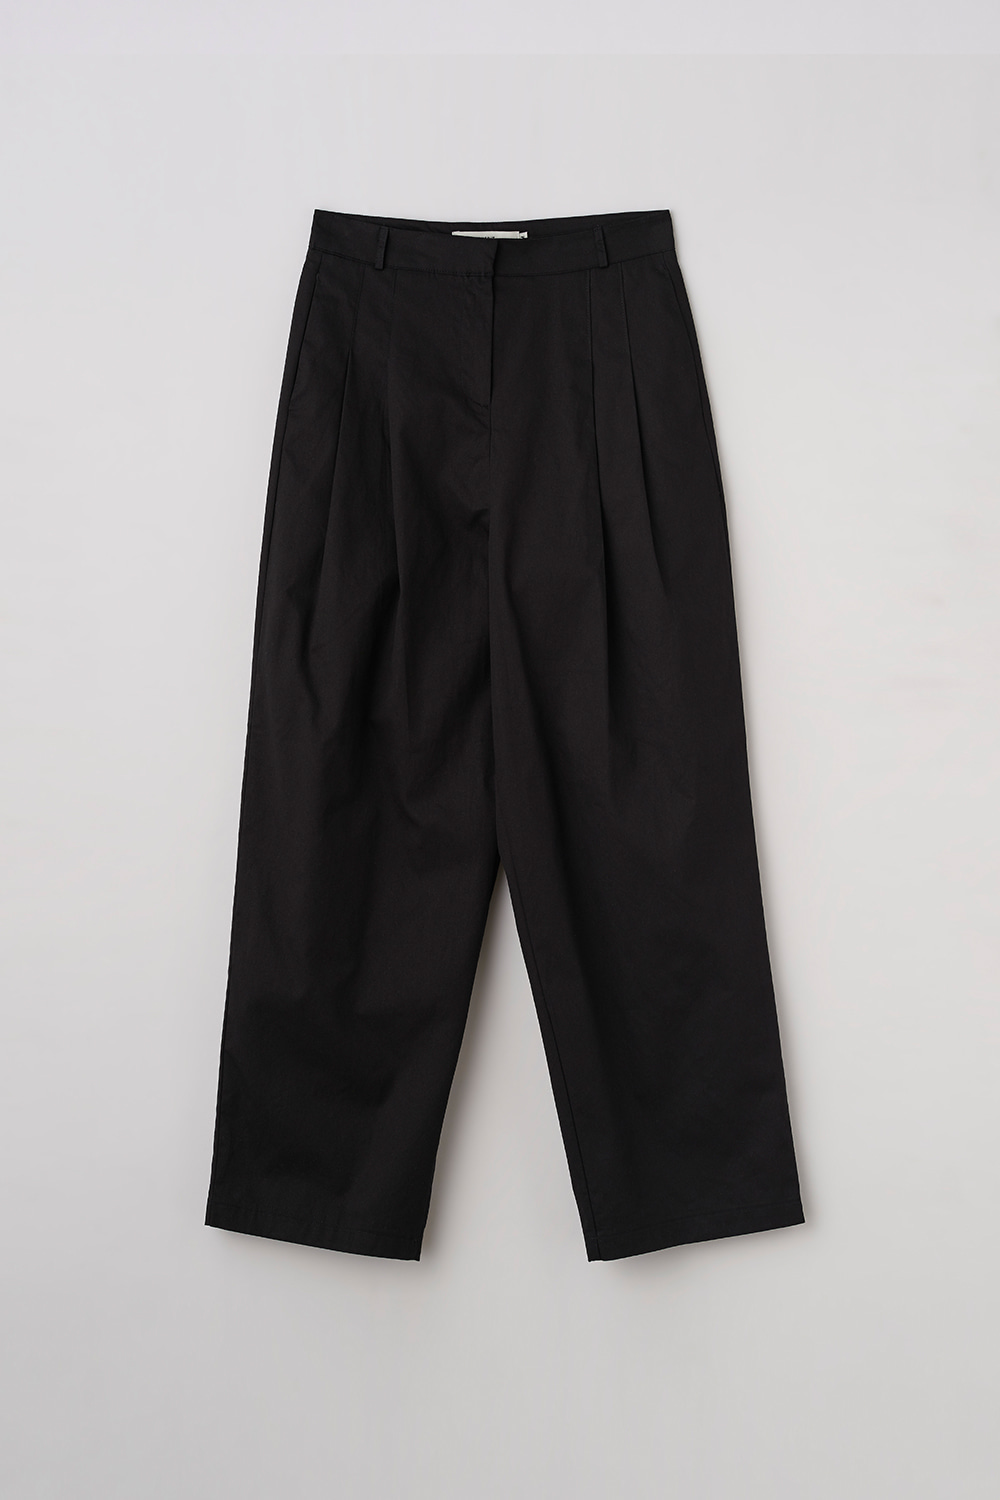 Two Tuck daily Pants_BK